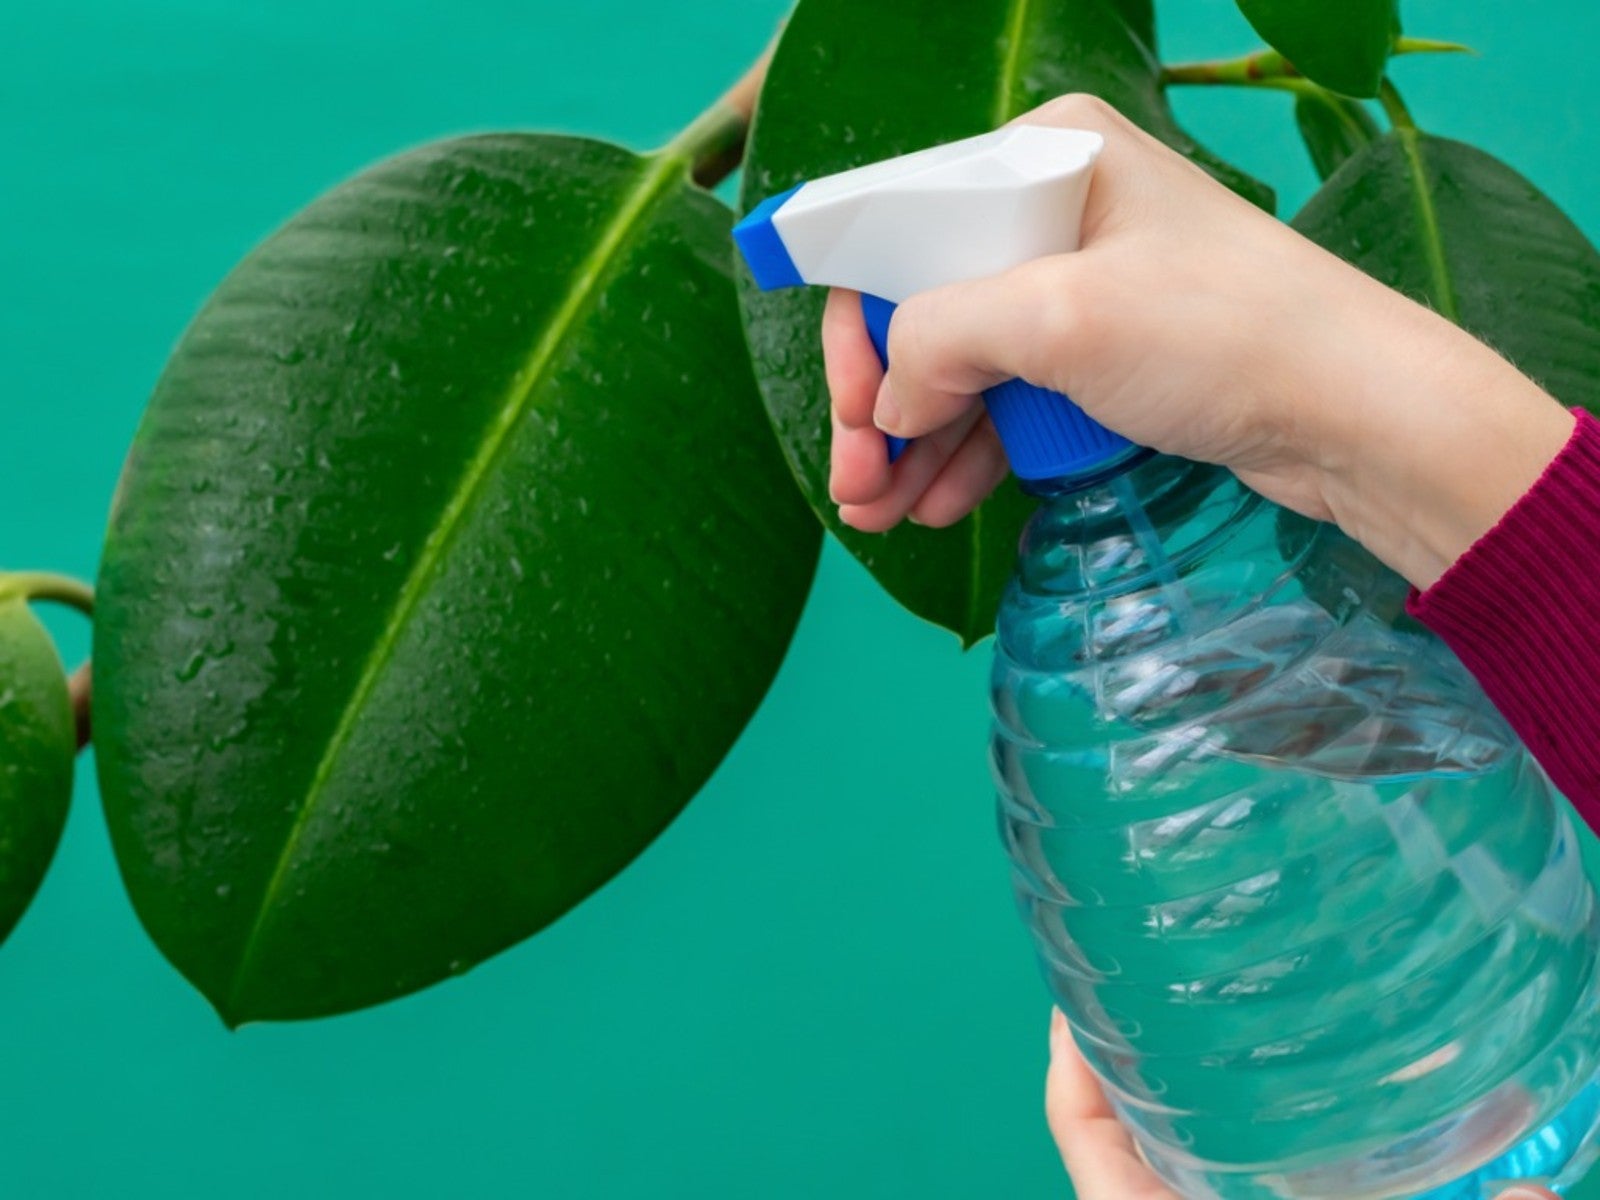 Is Dish Soap Safe For Plants? Why It's Not a Good Bug Spray